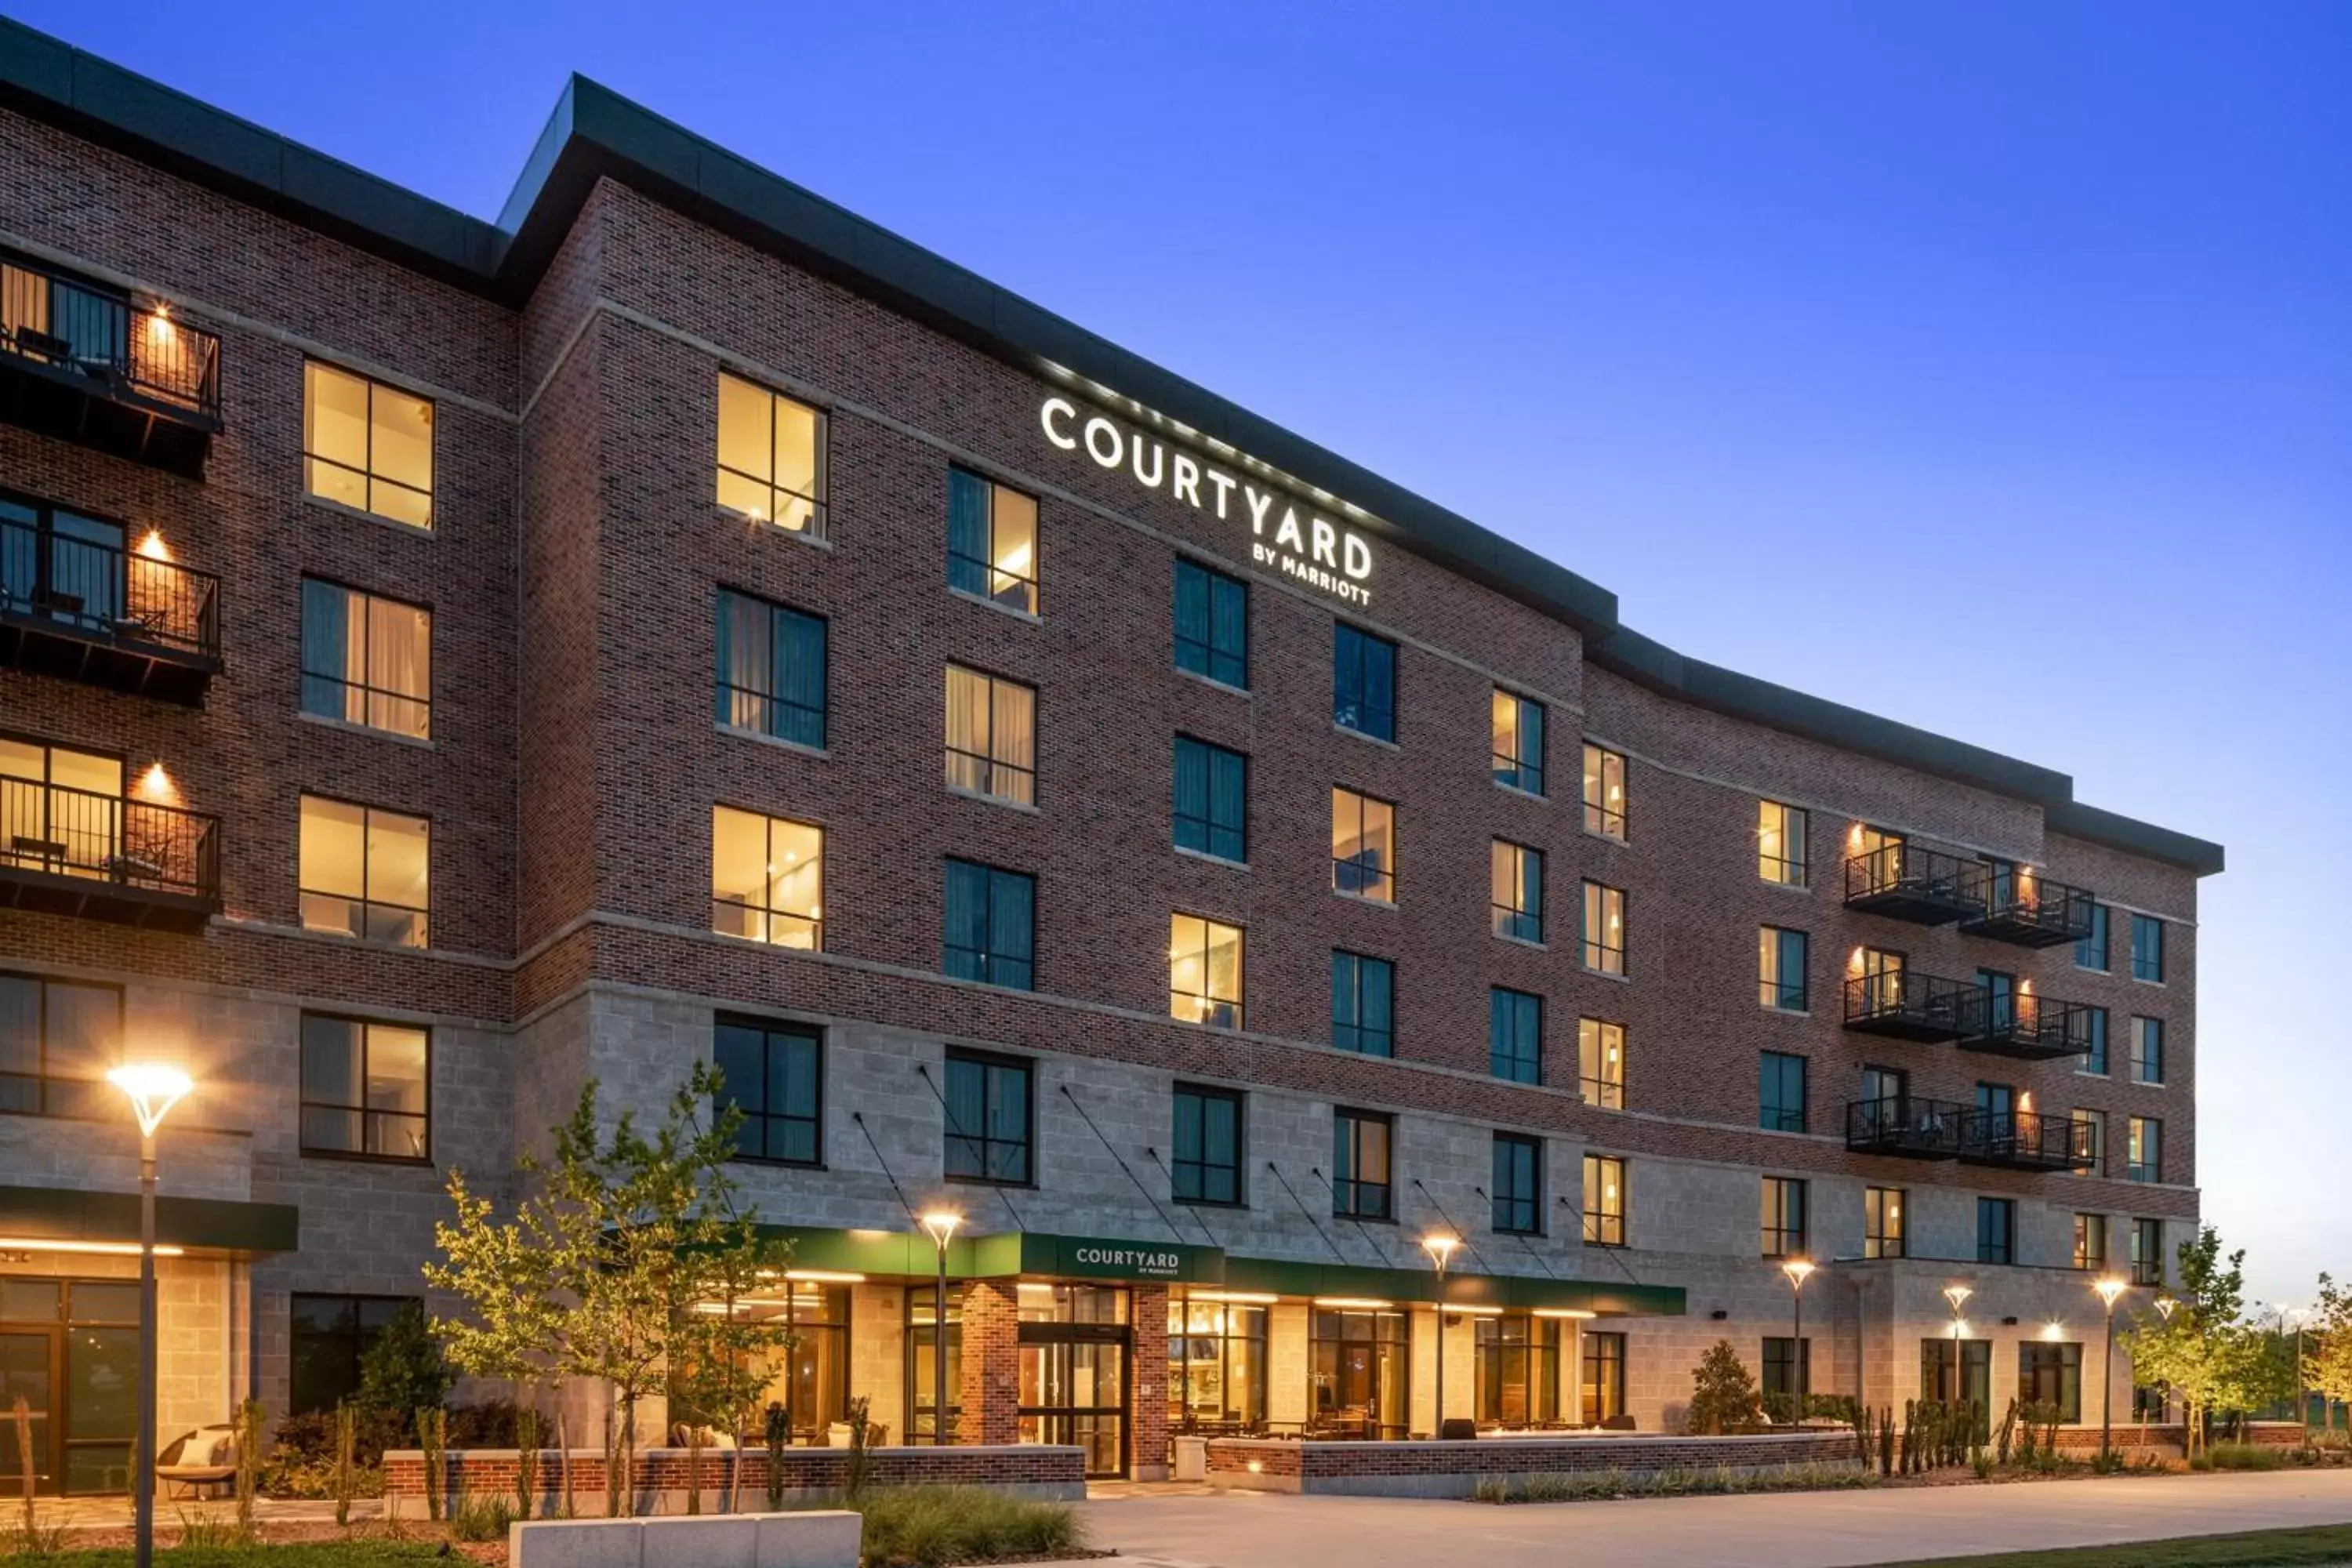 Property Building in Courtyard by Marriott Houston Northeast